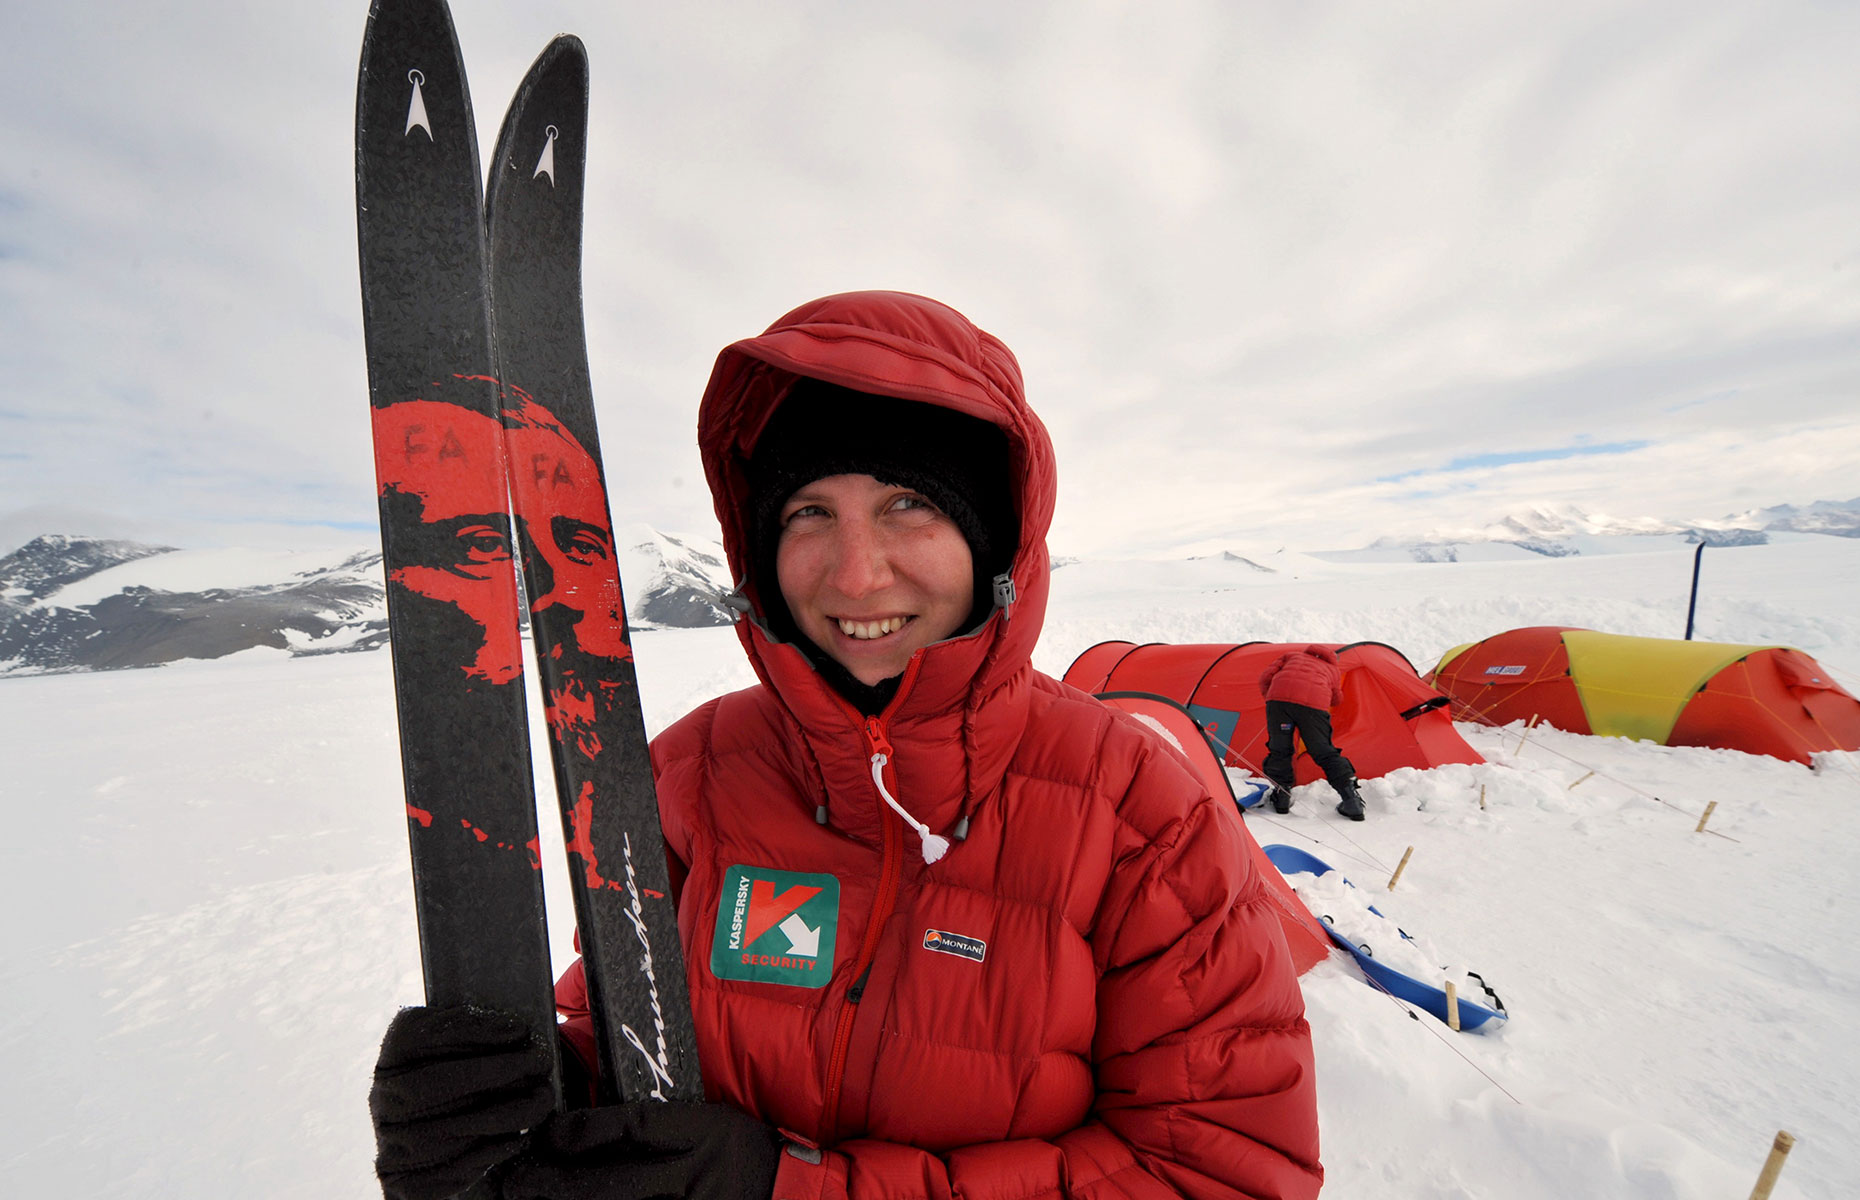 Felicity Aston in 2010 on a trip to the South Pole (Image: ALEXANDER BLOTNITSKY/AFP via Getty Images)